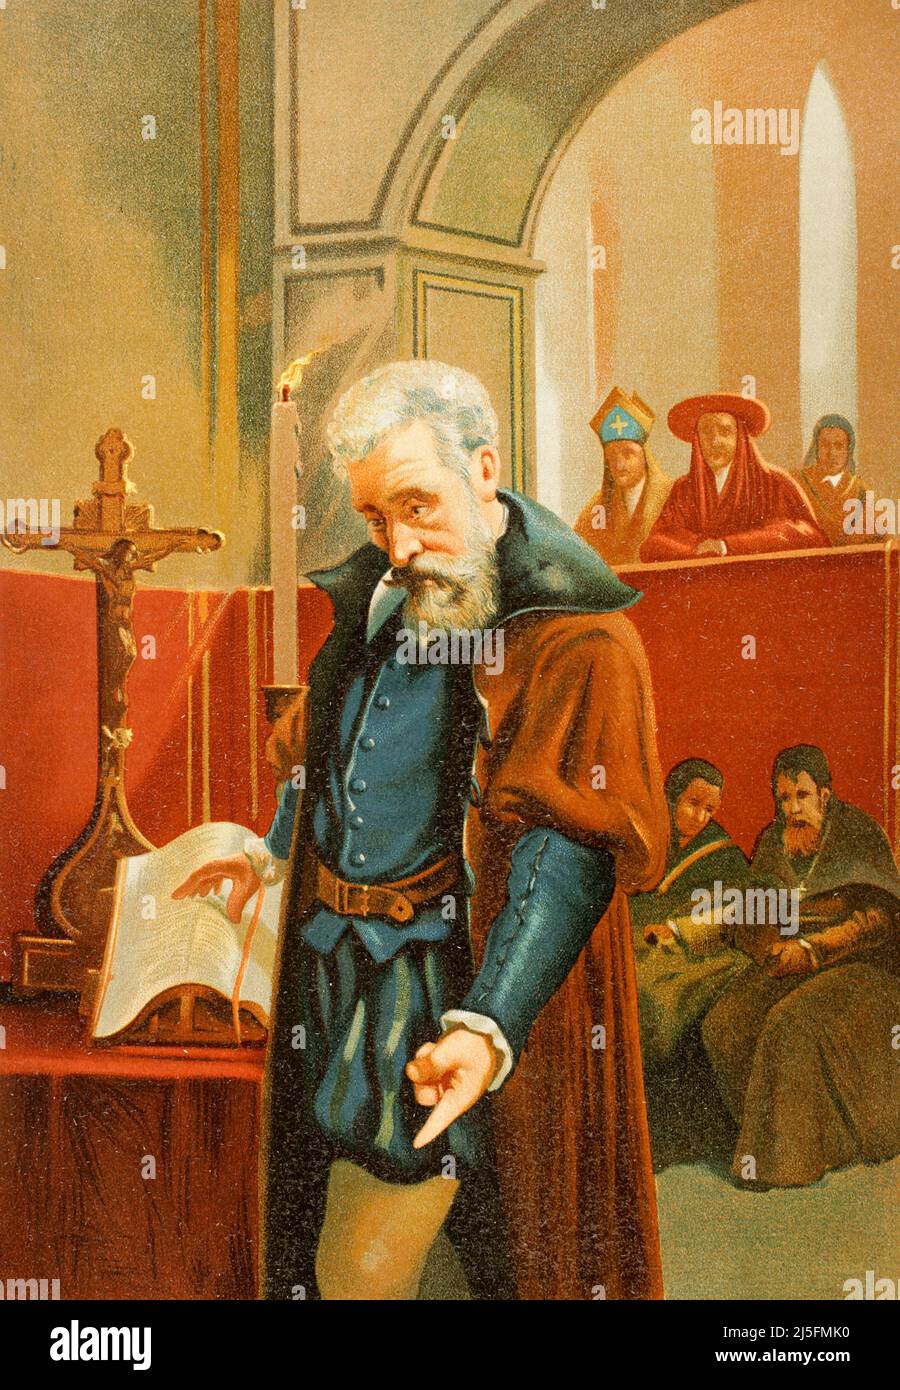 Galileo Galilei (1564-1642). Italian astronomer, mathematician and physicist. On 22 June 1633, Galileo was forced to abjure his doctrine before an inquisitorial tribunal, under the mandate of Pope Urban VIII. The trial was held at the Dominican convent of Santa Maria sopra Minerva in Rome. Chromolithography. Historia Universal, by César Cantú. Volume VIII. Published in Barcelona, 1886. Stock Photo